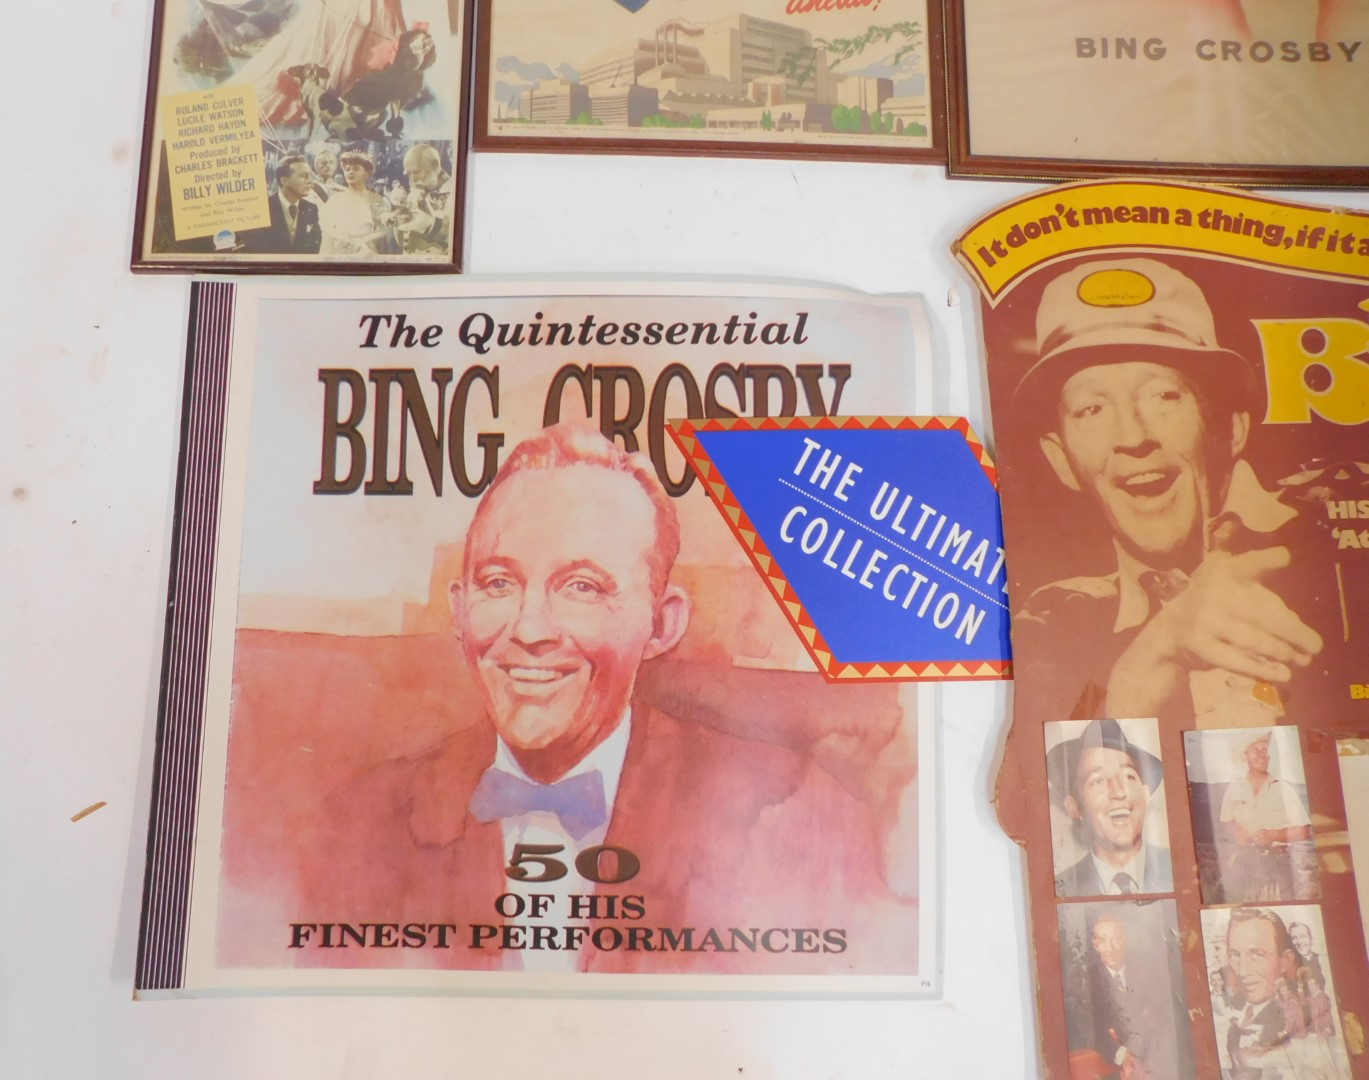 A collection of Bing Crosby posters, to include advertising 'Keep on Saving We've Great Things to do - Image 2 of 6